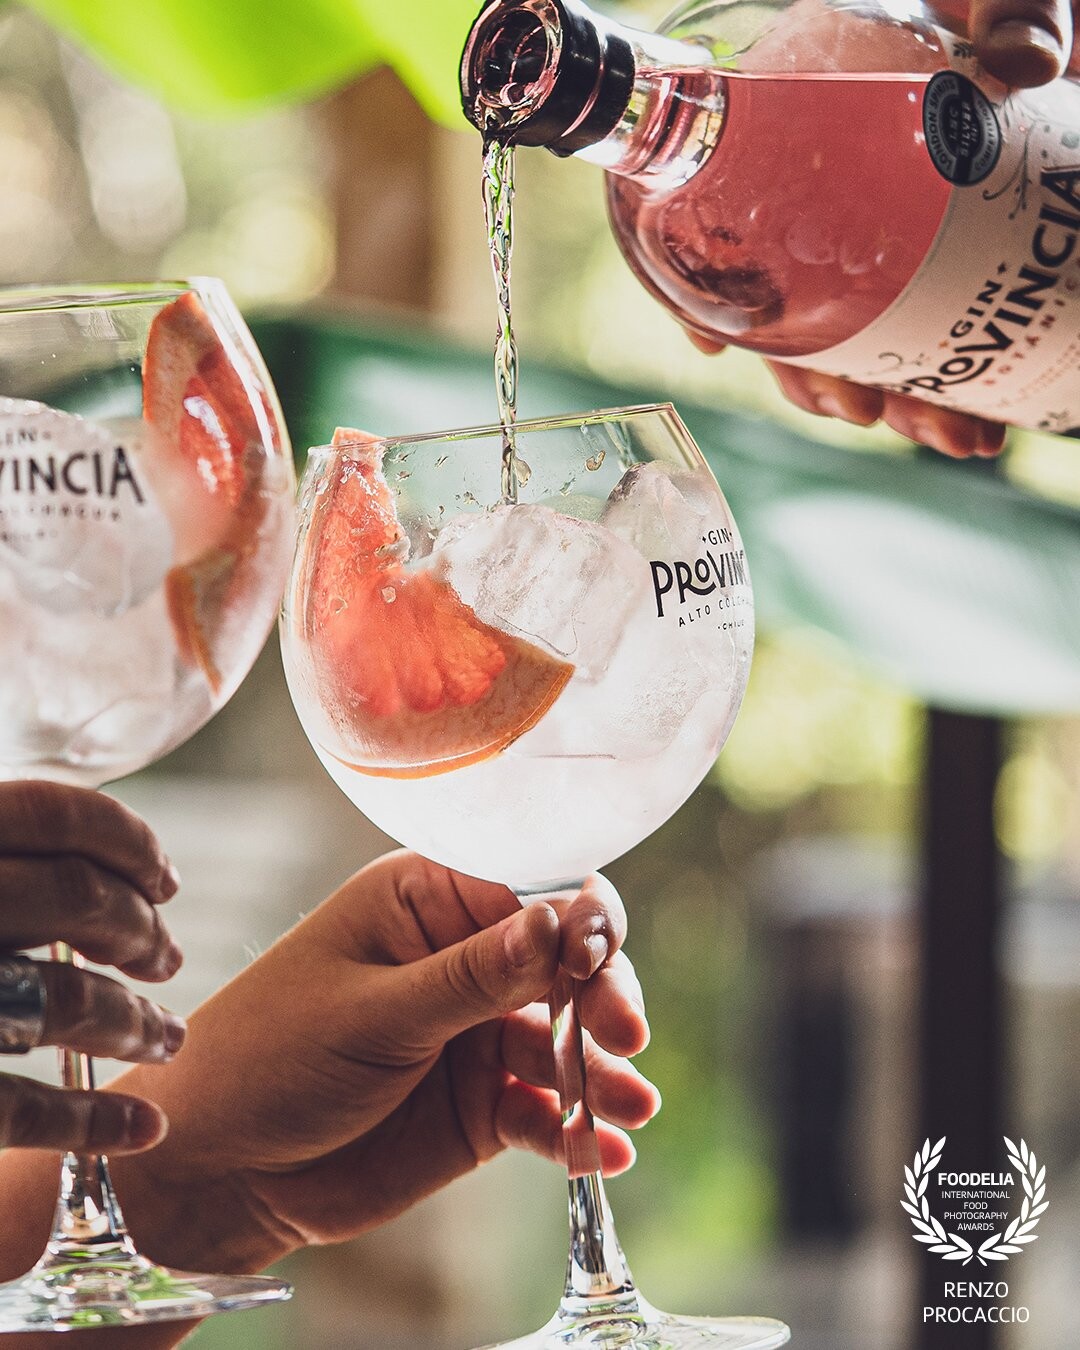 I took this photo for a brand that I have worked with frequently, the idea was to capture a little of the movement when you serve the gin in a glass. @ginprovincia